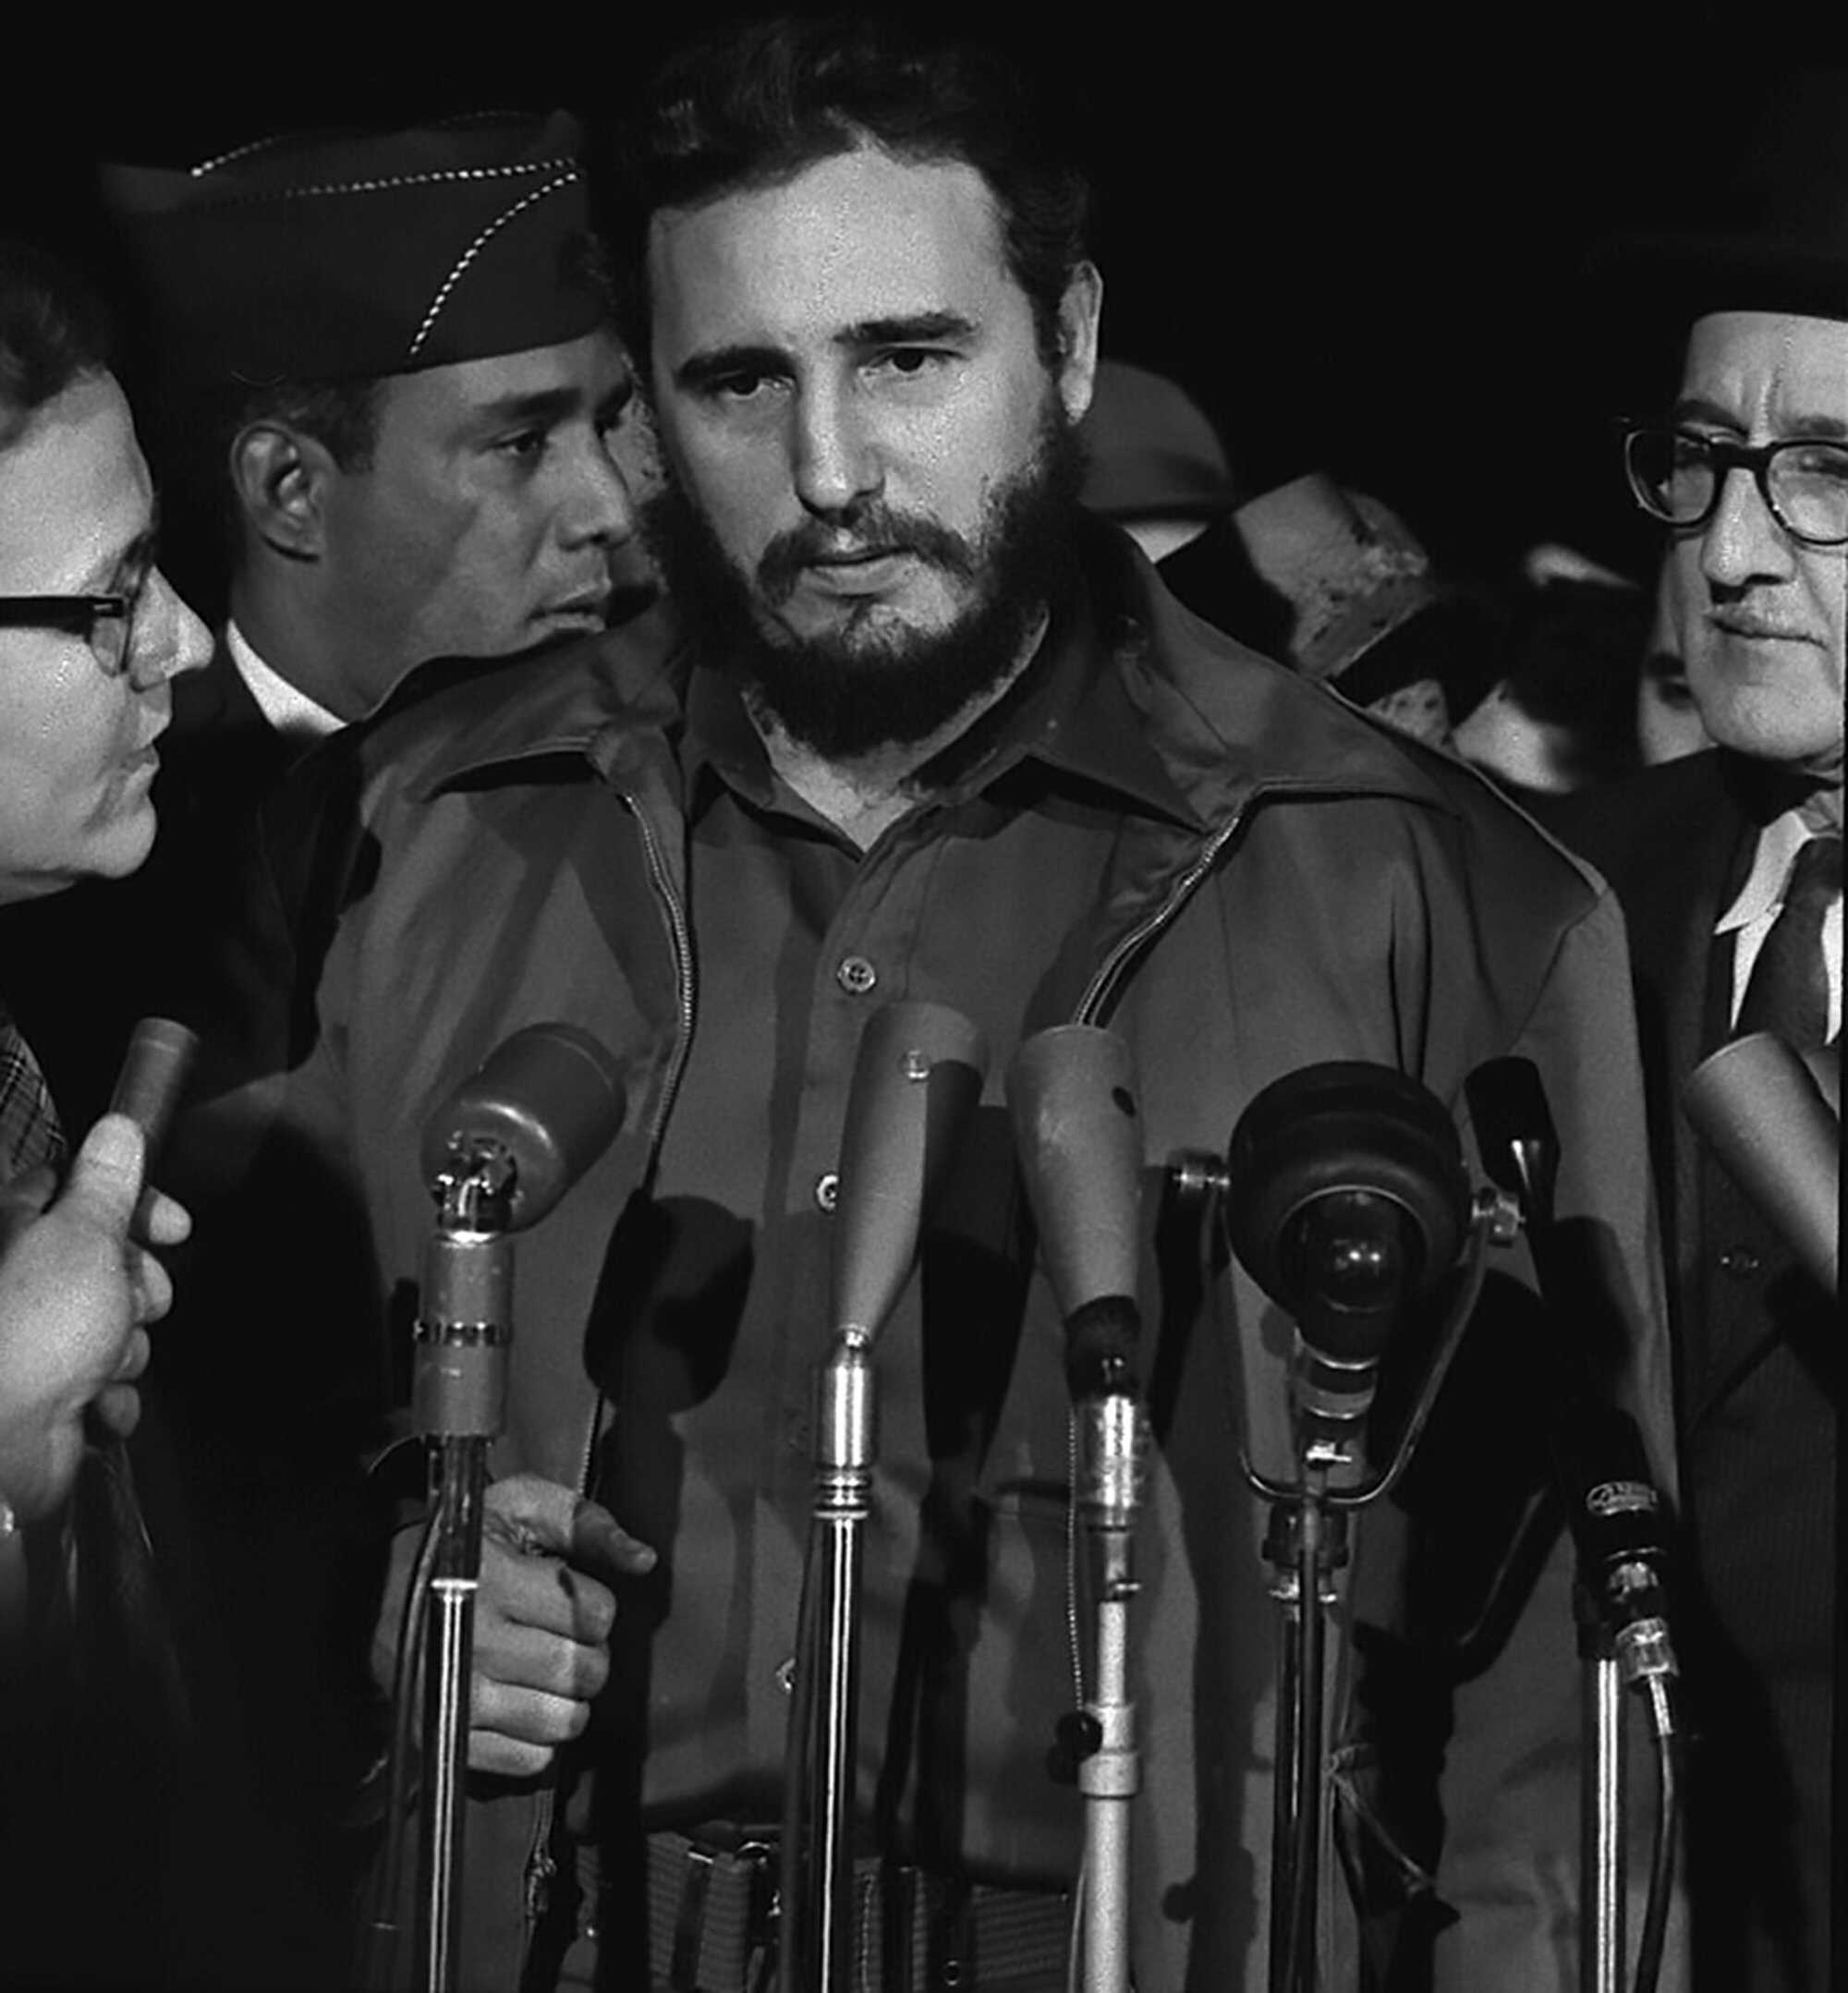 Fidel Castro's health was a topic of speculation